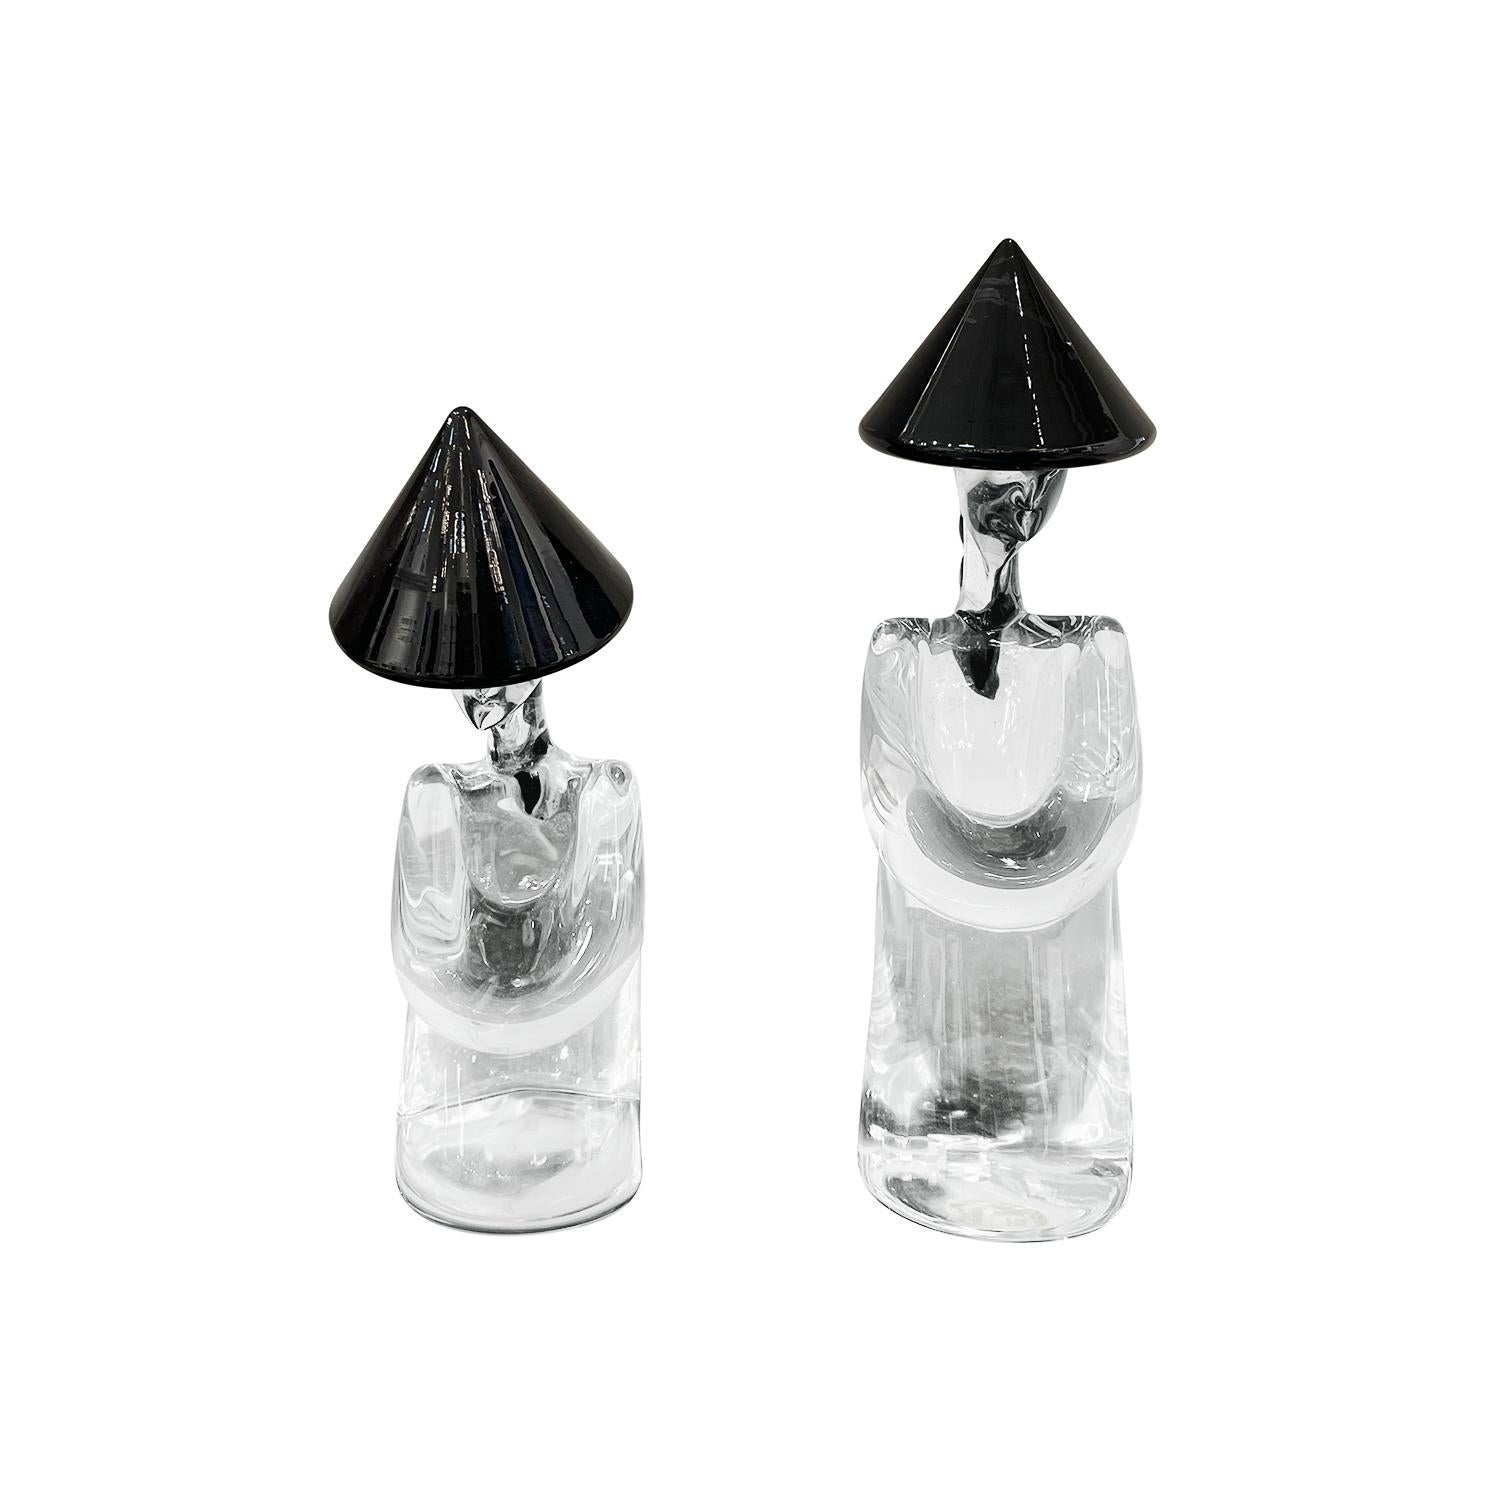 A vintage Mid-Century modern Italian pair of small Japanese farmers with a large black hat made of hand blown colored Murano Sommerso glass, designed and produced by Archimede Seguso in good condition. The detailed décor pieces represent a woman and